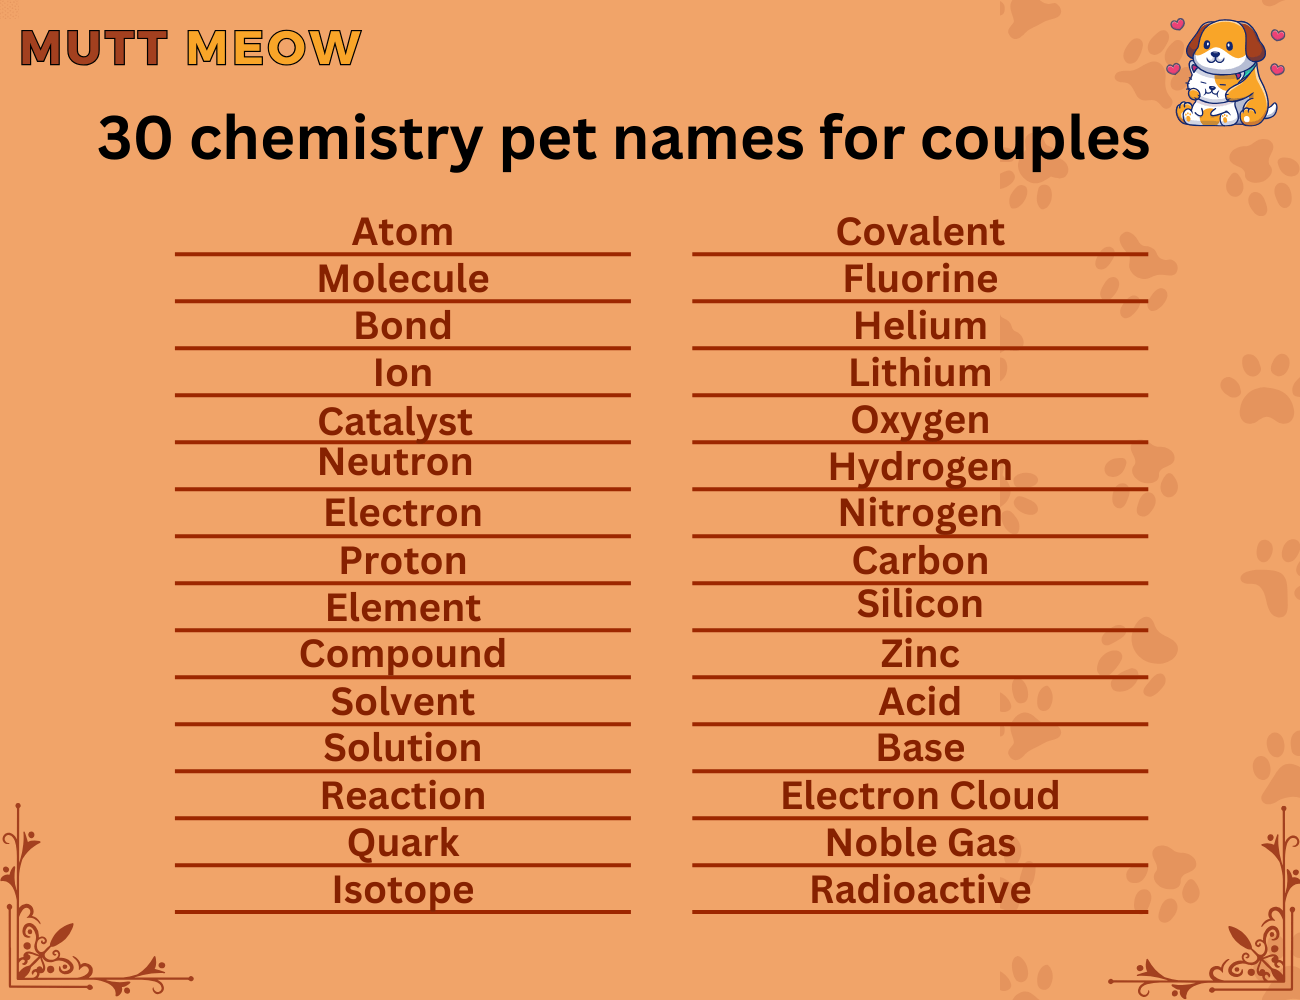 30 chemistry pet names for couples